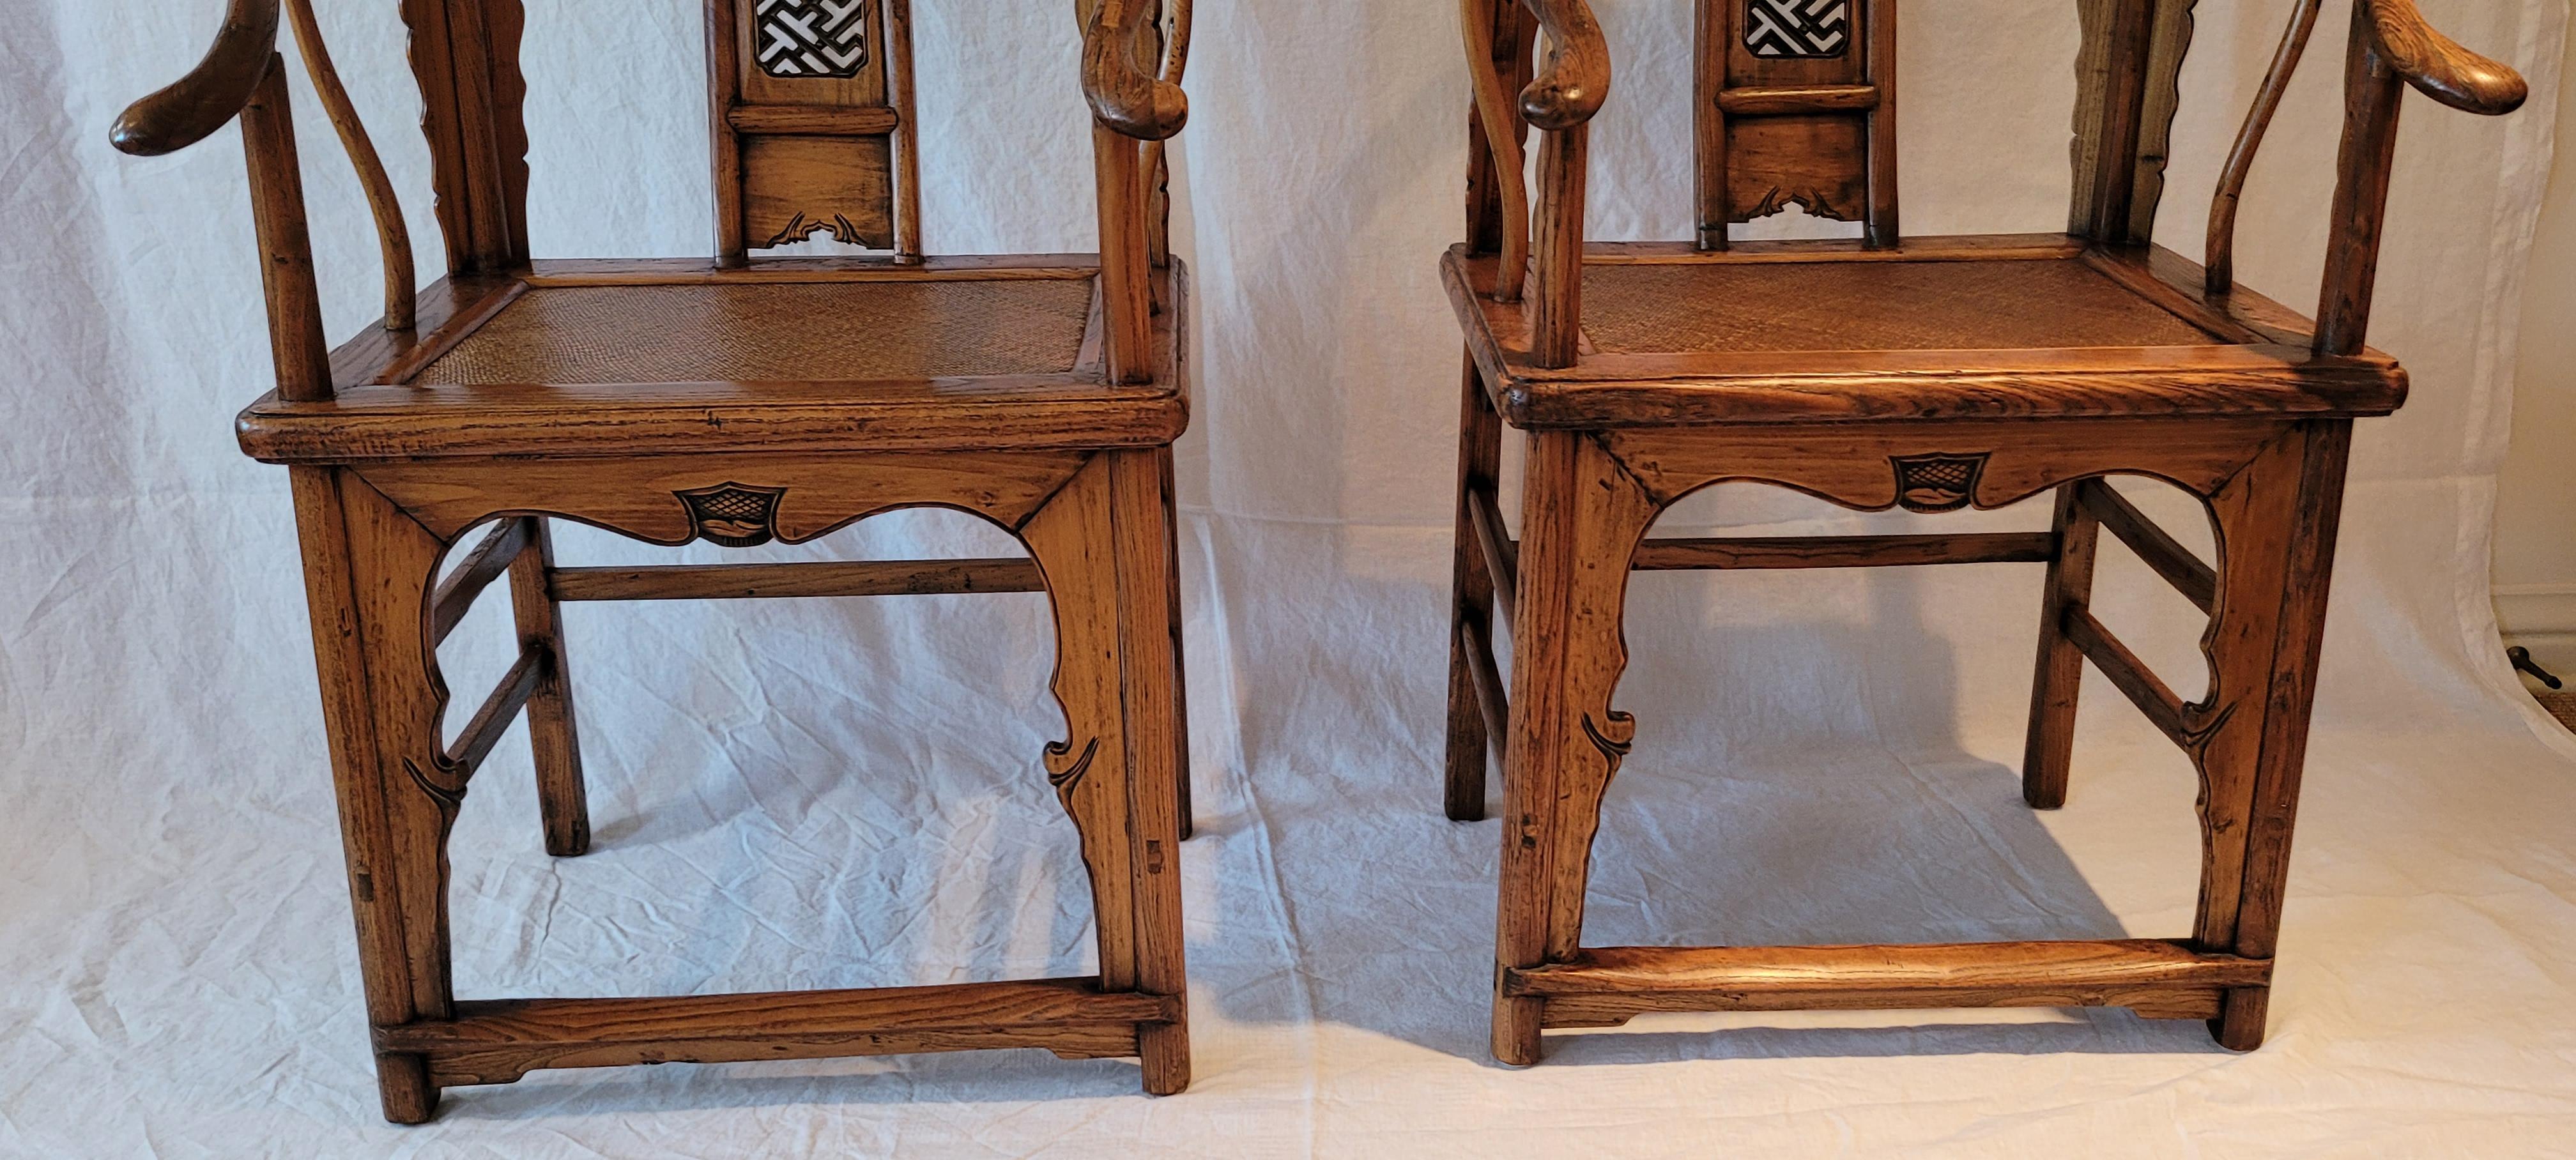 Chinese Pair of Horseshoe Back Chairs - mid 19th Century For Sale